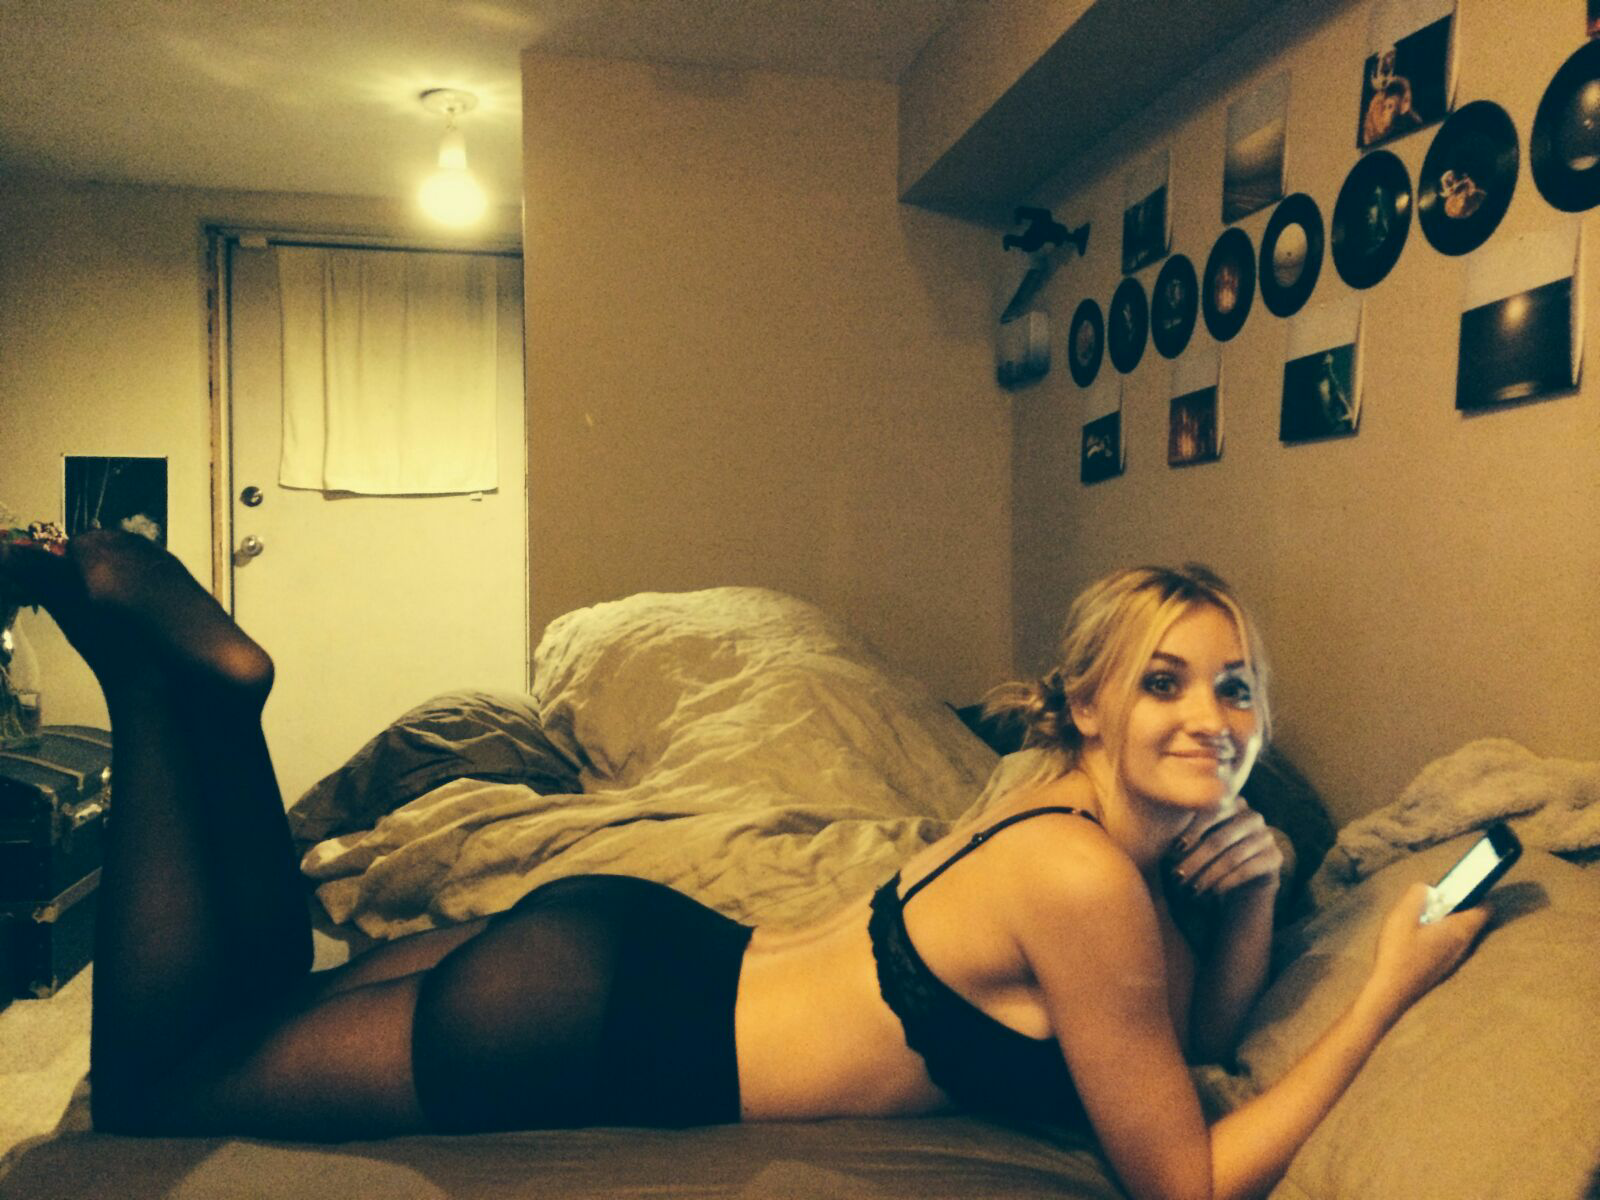 AJ Michalka’s Smooth Pussy Shown Up Close